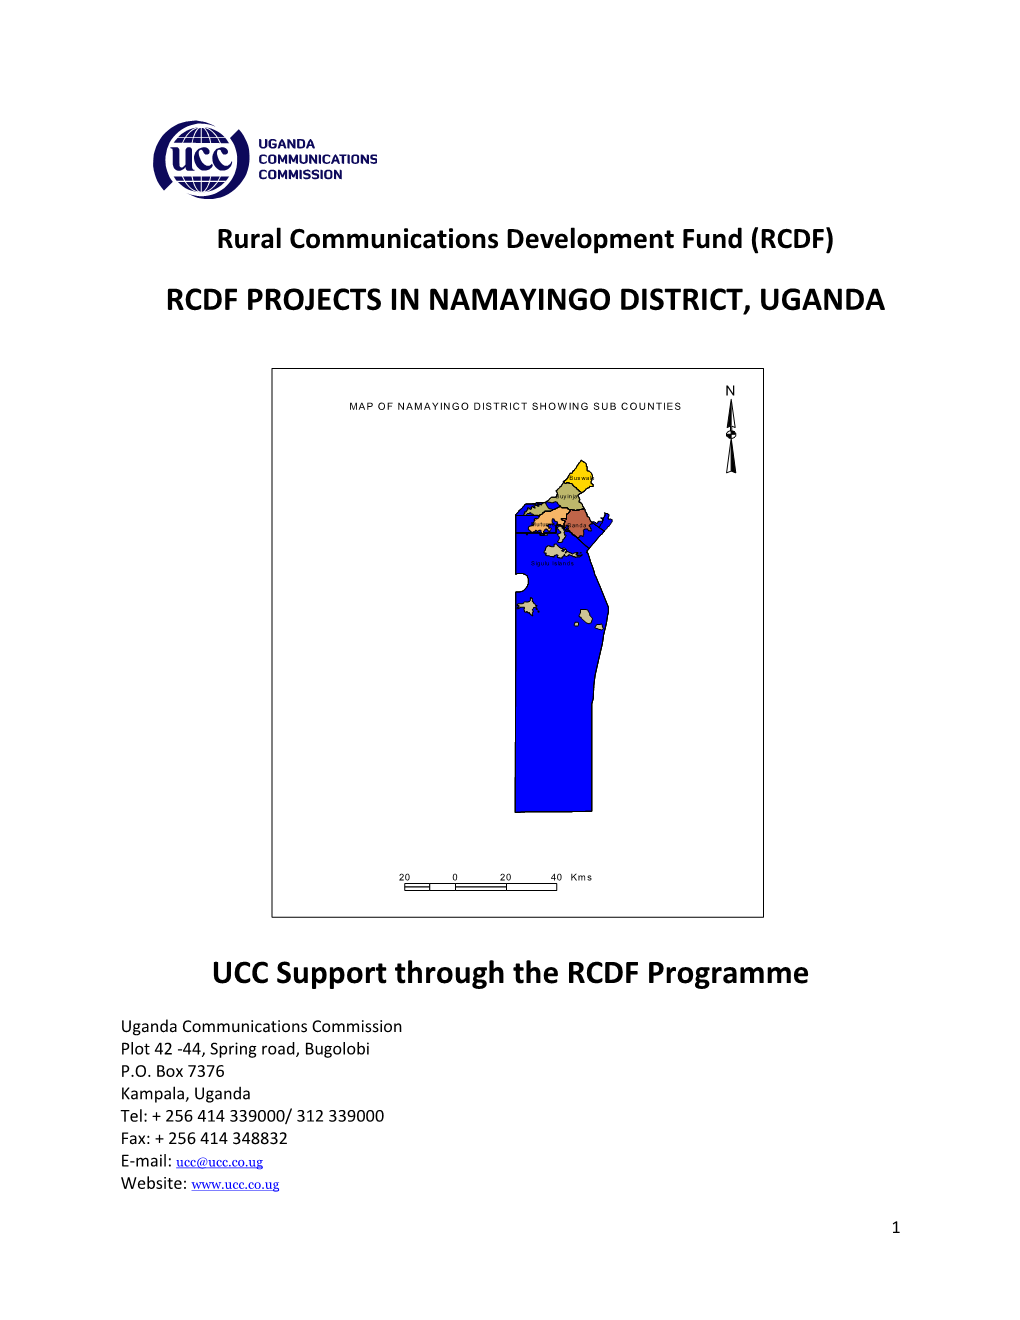 RCDF PROJECTS in NAMAYINGO DISTRICT, UGANDA UCC Support